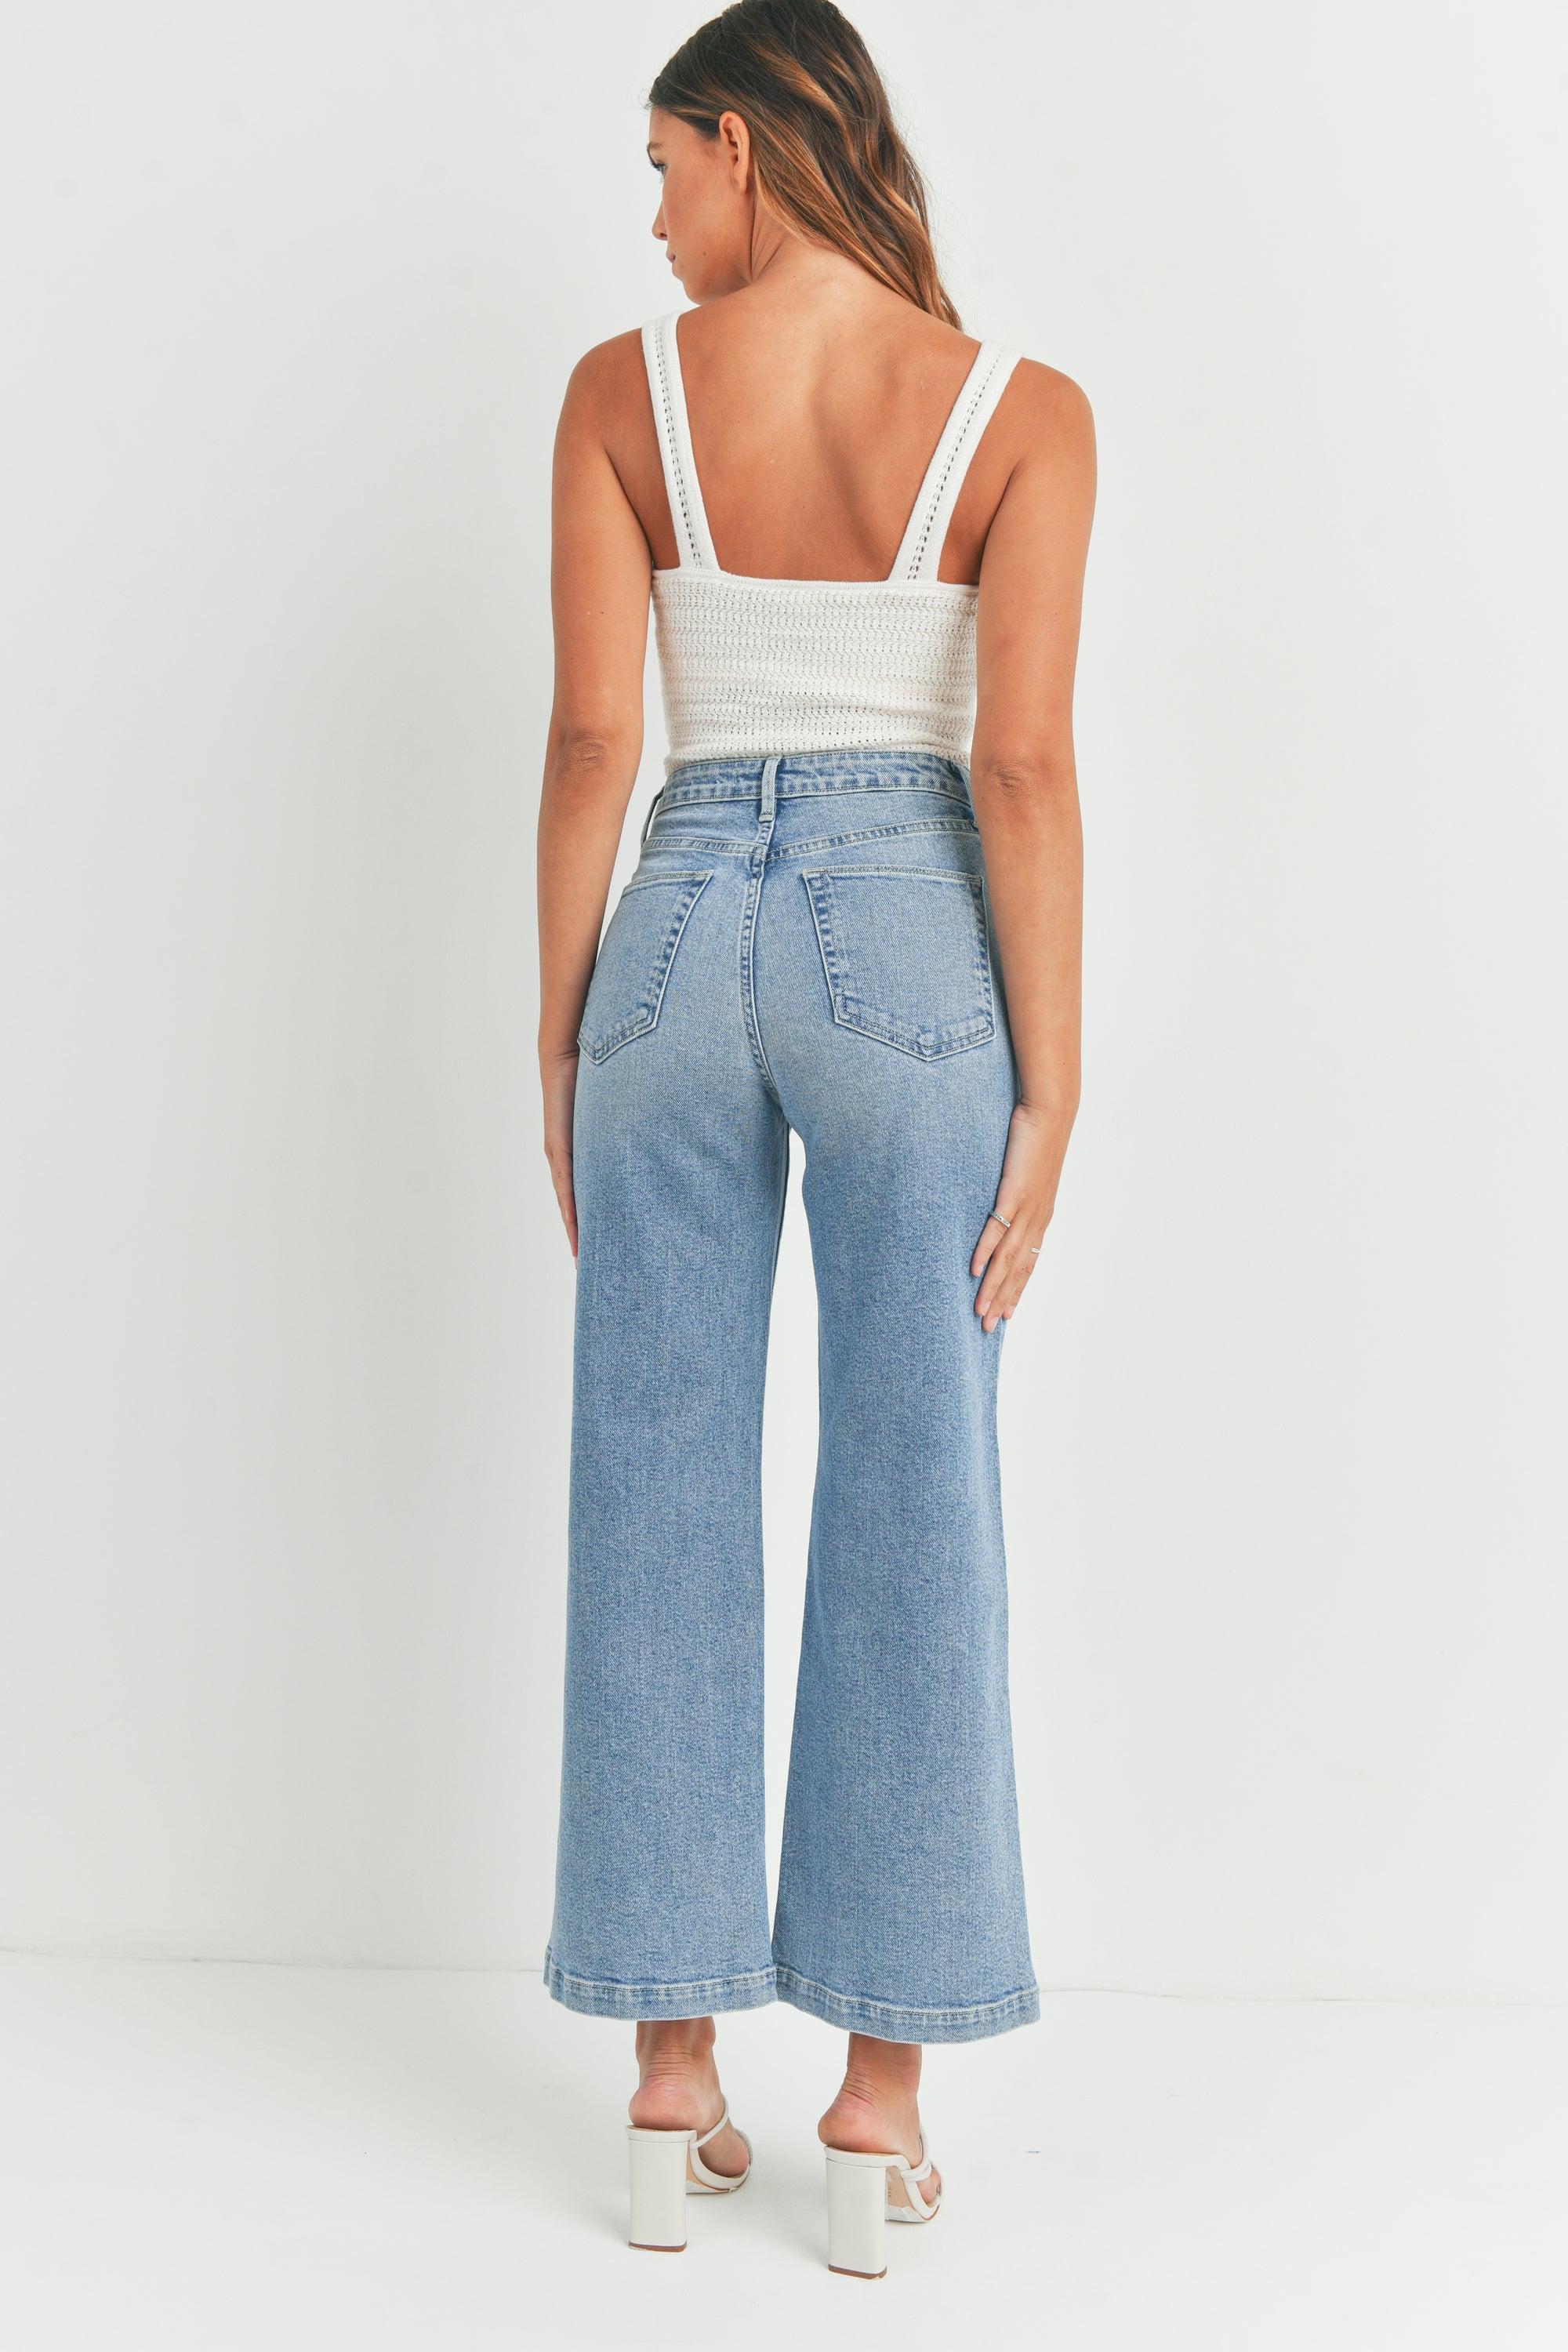 Sage the Label, Gia Wide Leg Jeans